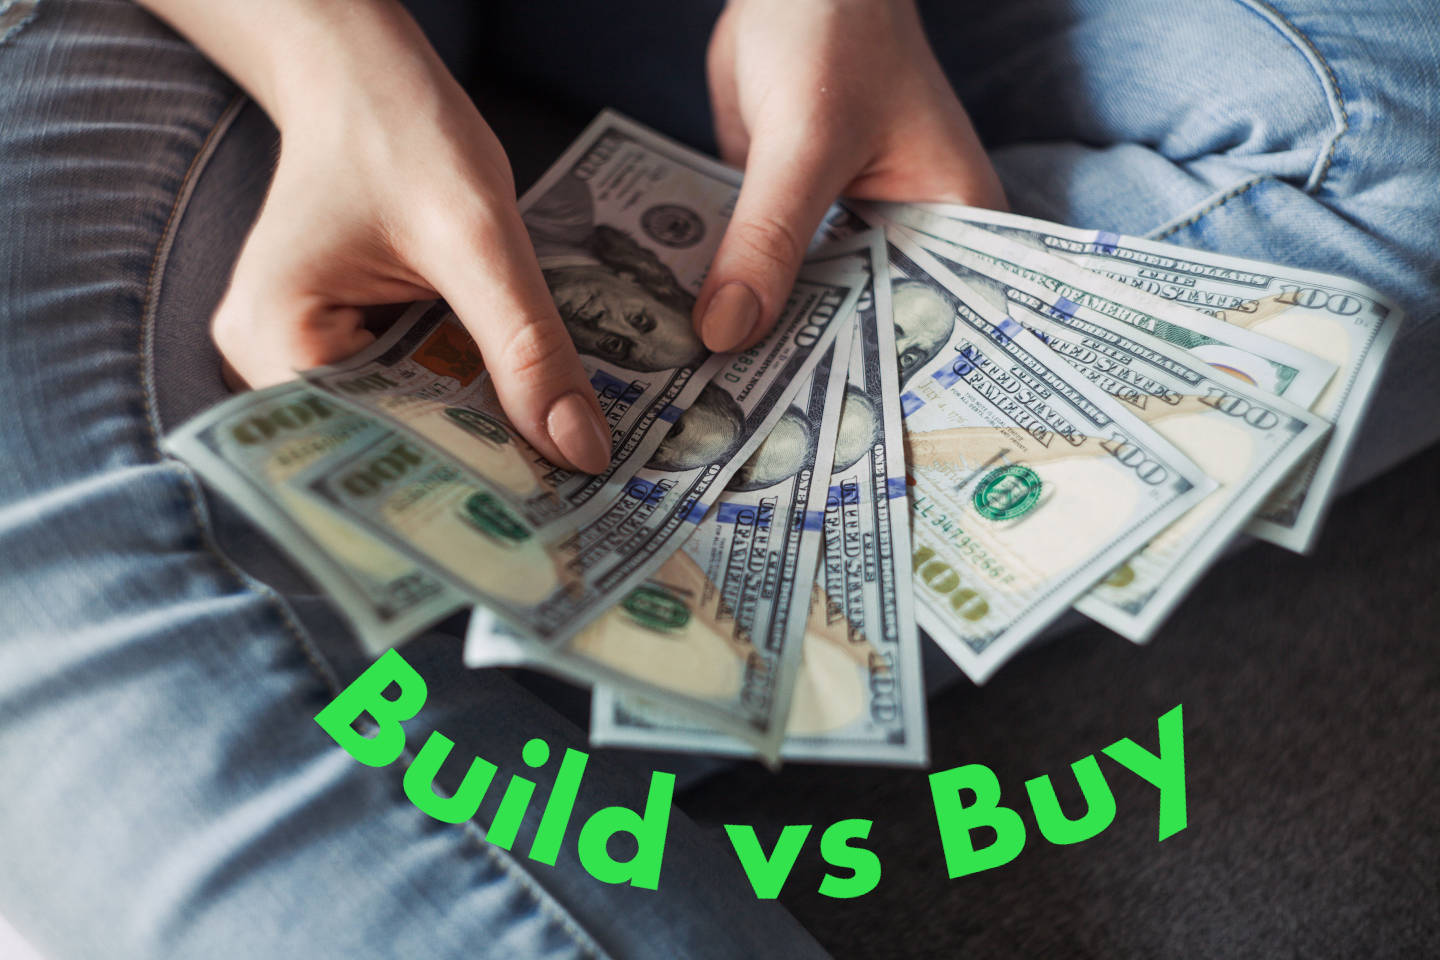 Build vs Buy - things to consider